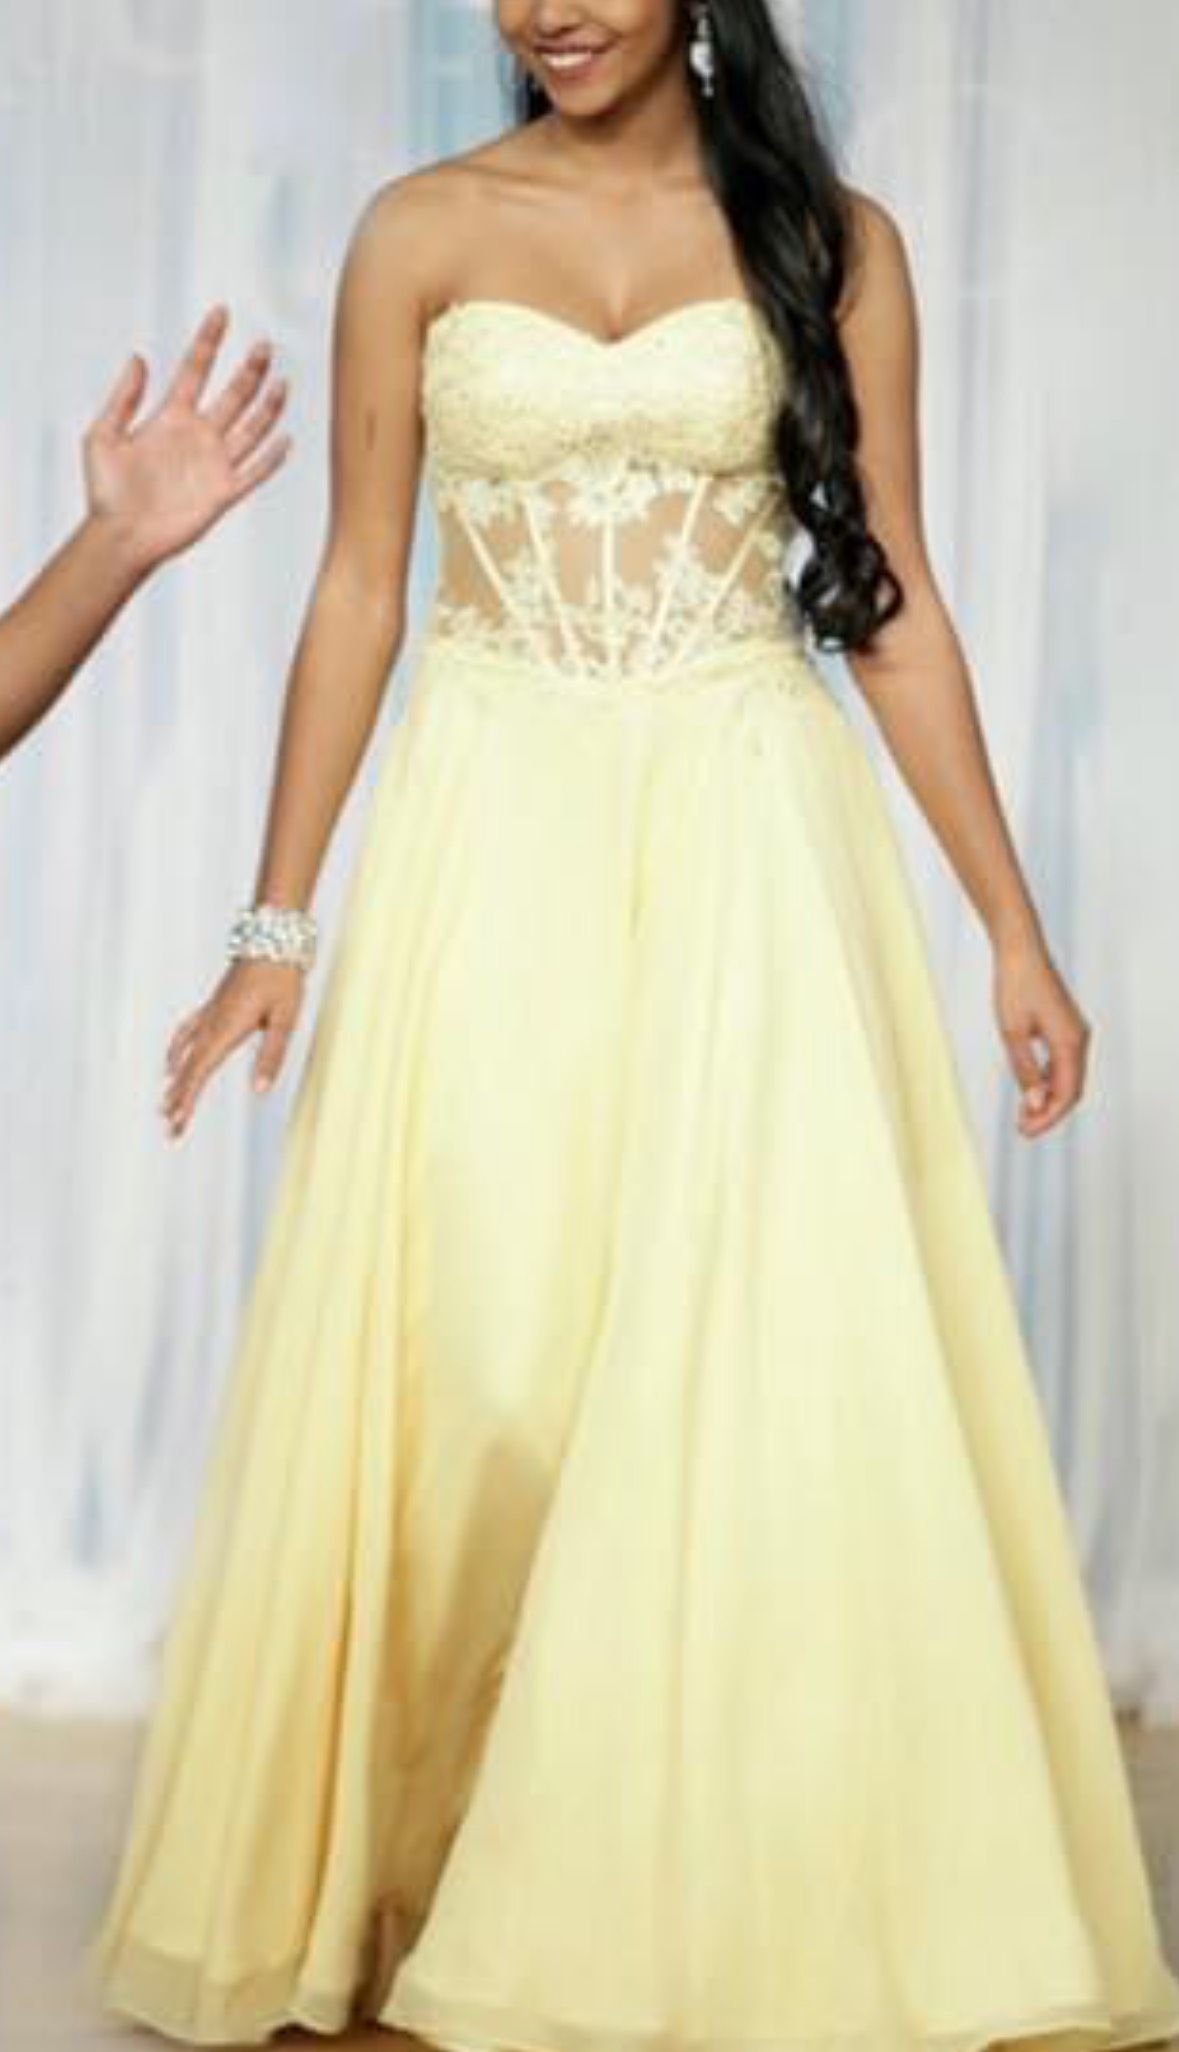 Camille La Vie Size 0 Prom Strapless Yellow A-line Dress on Queenly